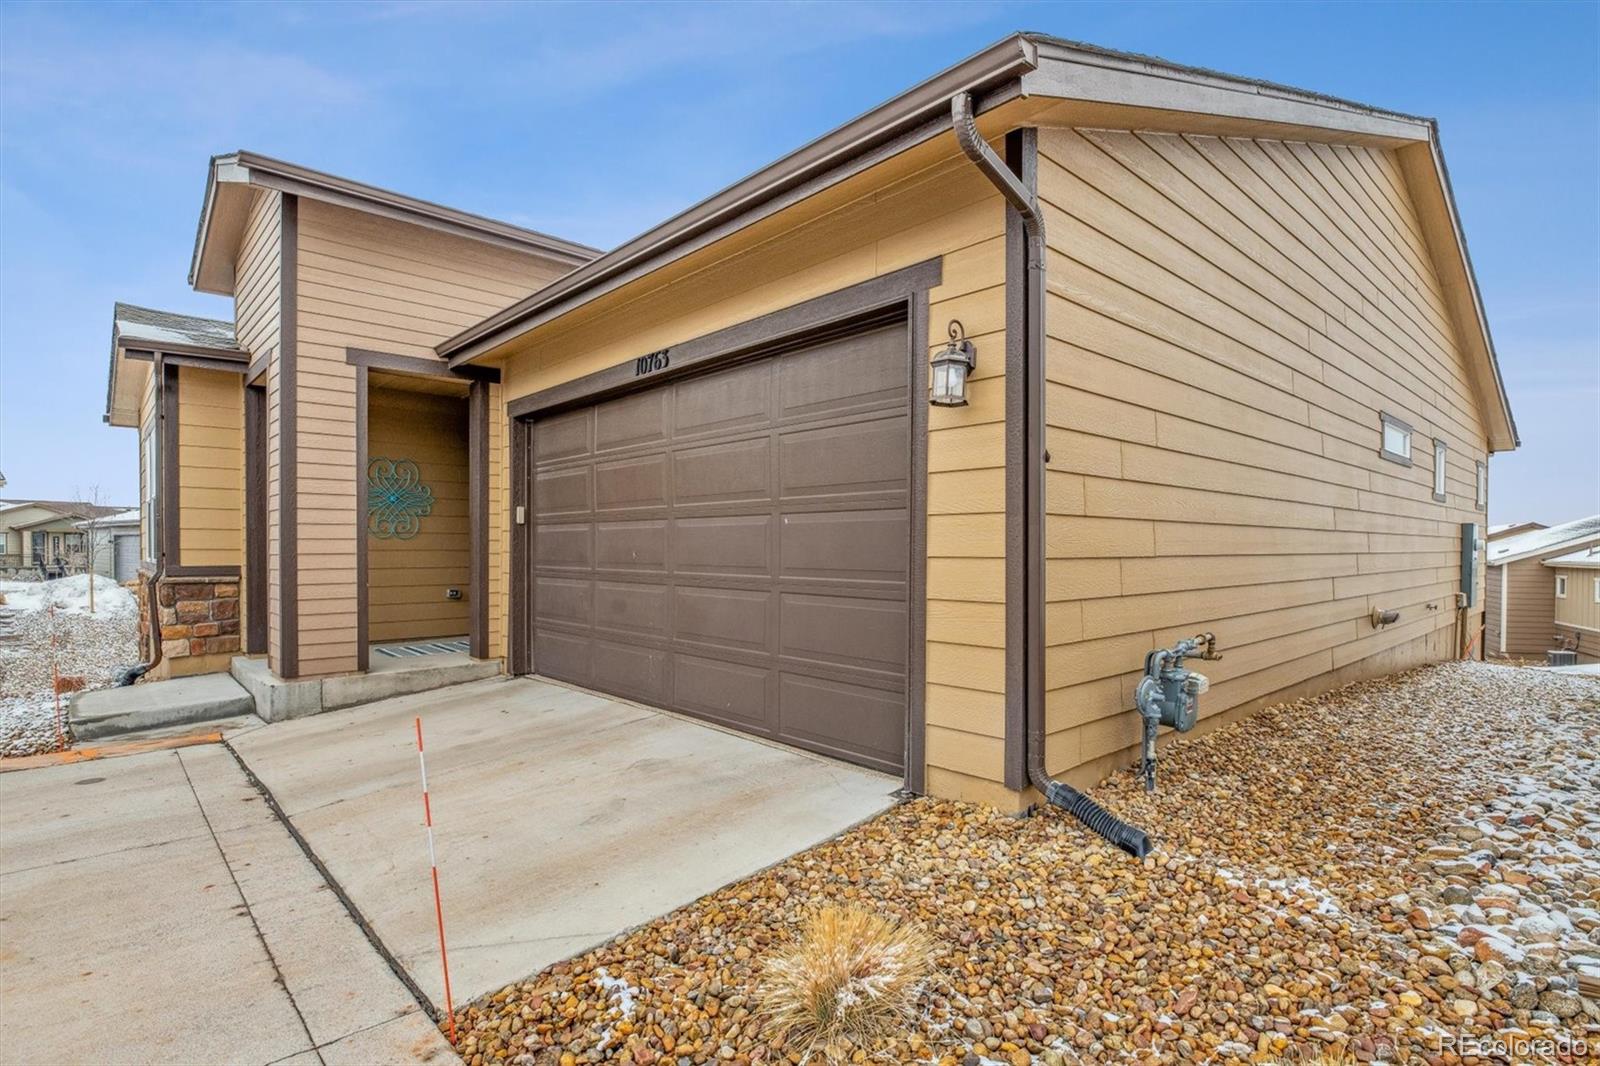 10763 N Montane Drive, broomfield Rent To Own Search Picture